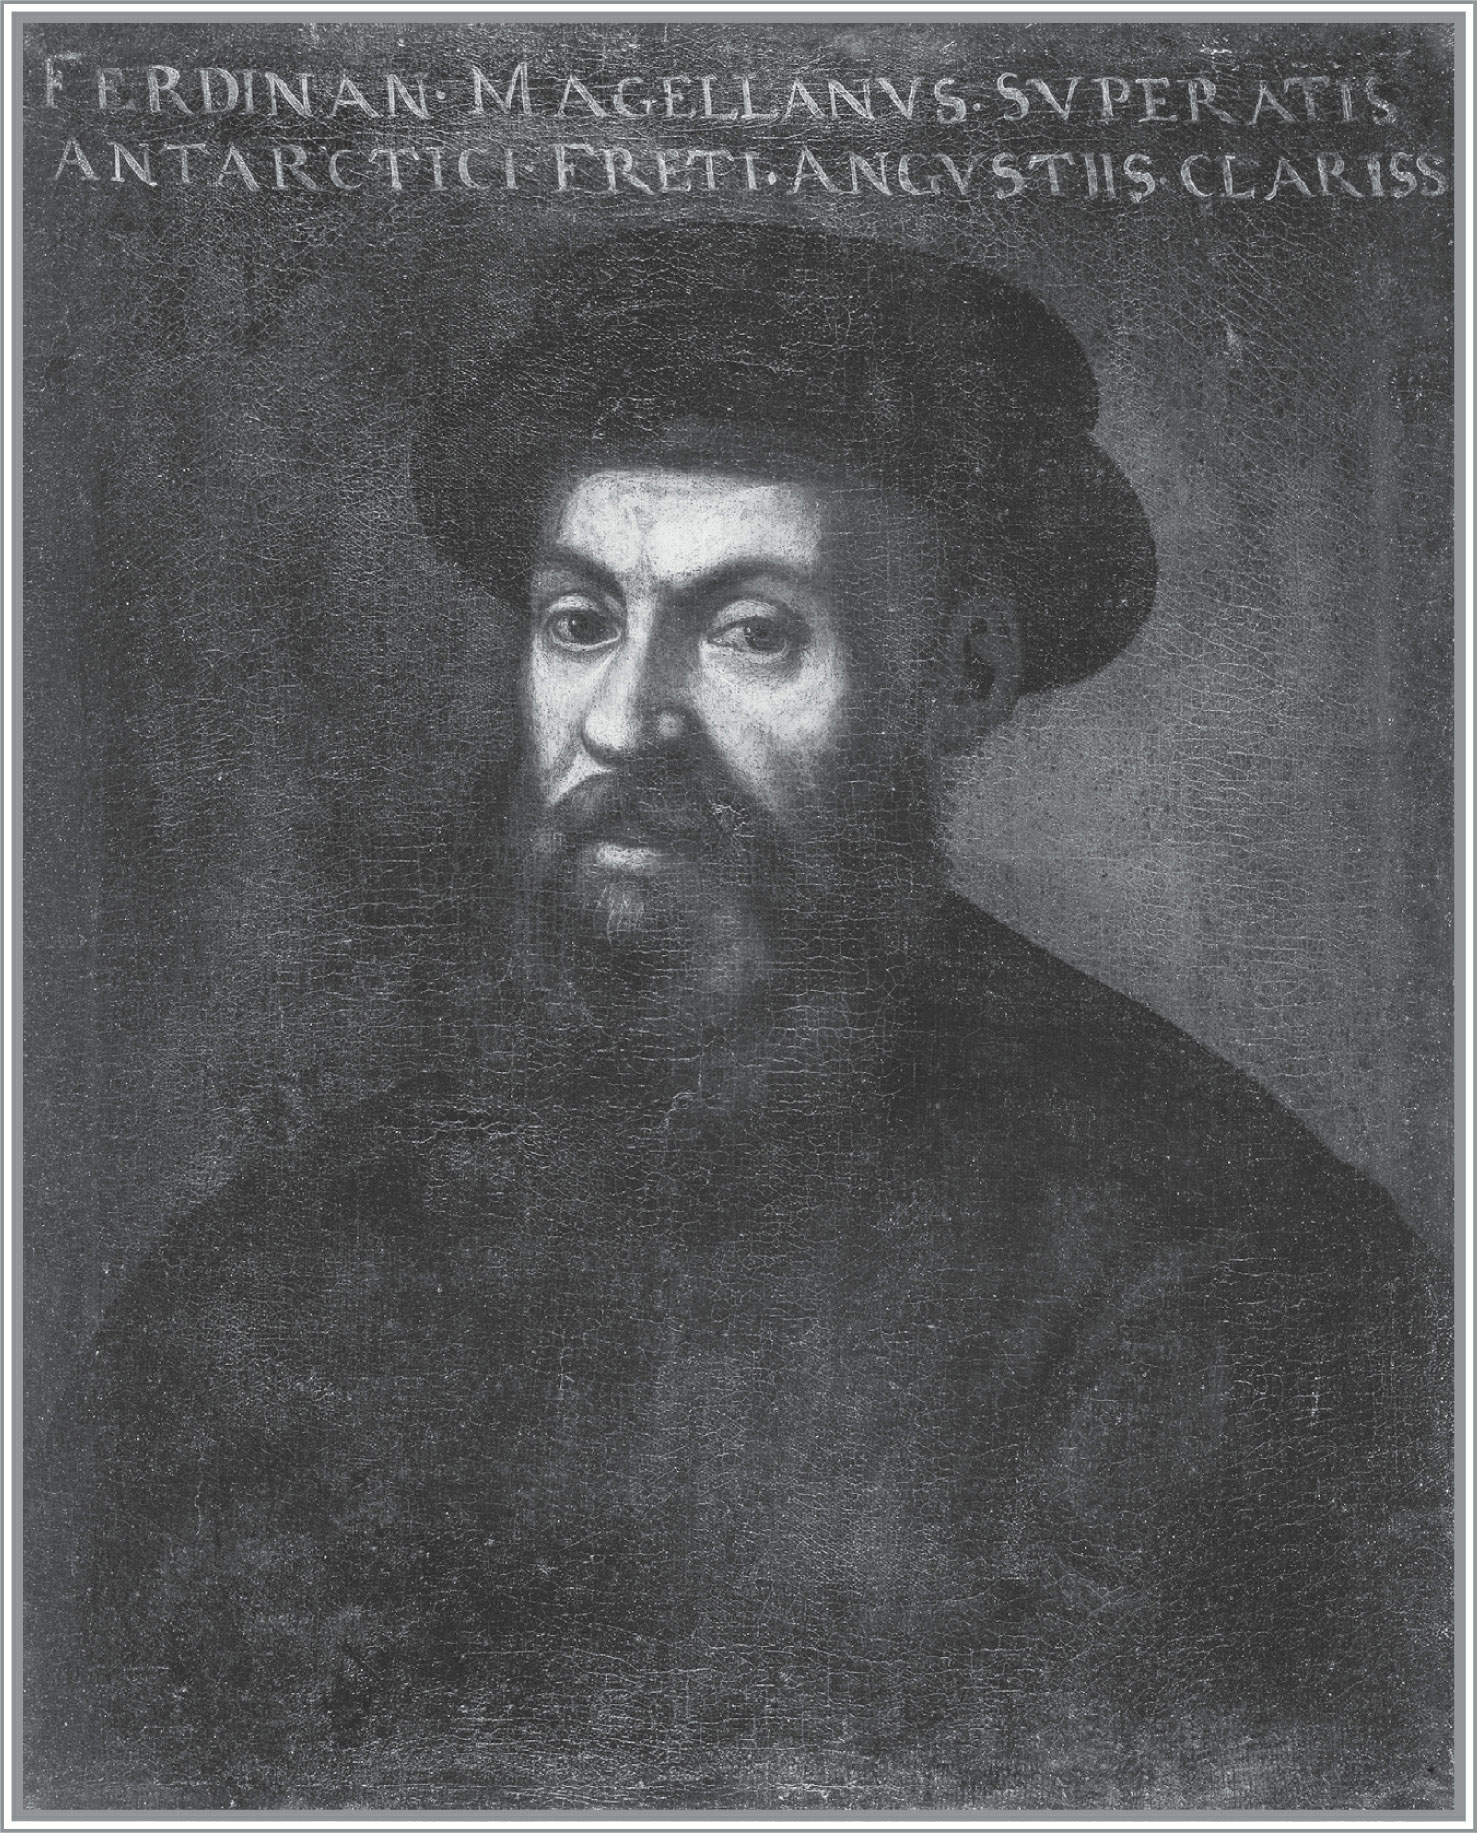 FERDINAND MAGELLAN. This portrait of the Portuguese explorer and captain of the Armada de Molucca is “believed to be one of the few accurate likenesses of Magellan,” wrote historian Laurence Bergreen in his book Over the Edge of the World.